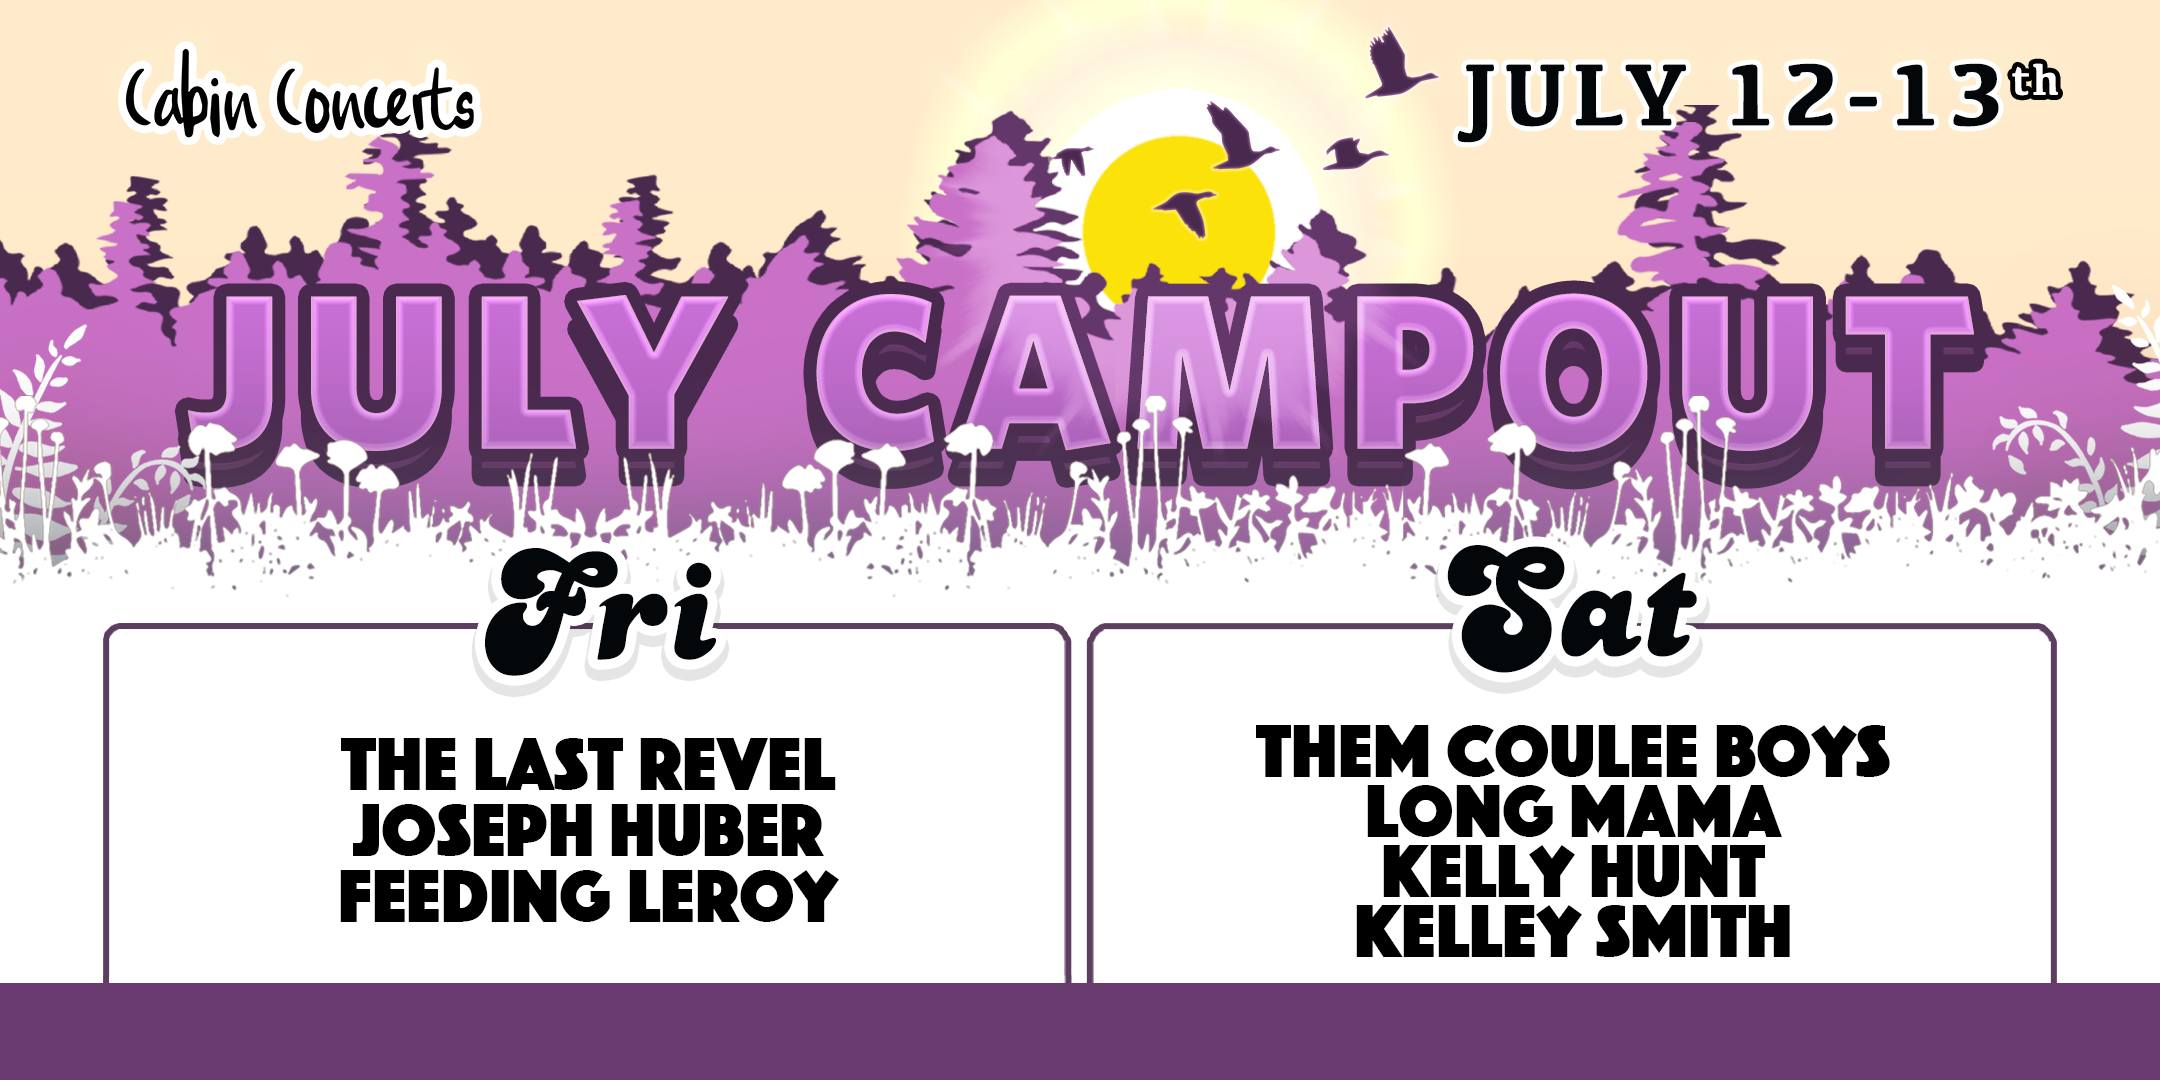 july 12-13th event